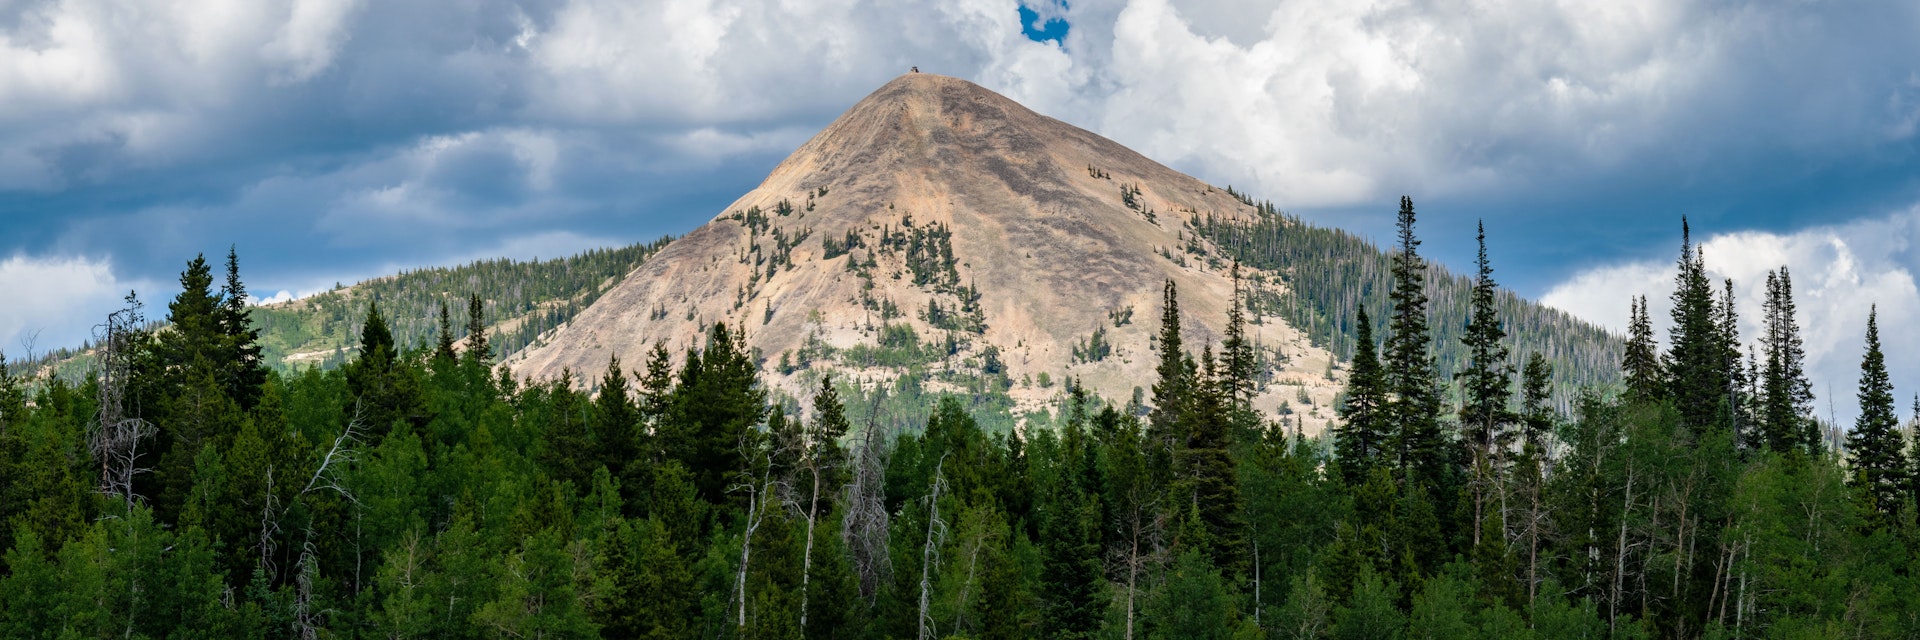 Hahn's Peak from Steamboat Lake State park.